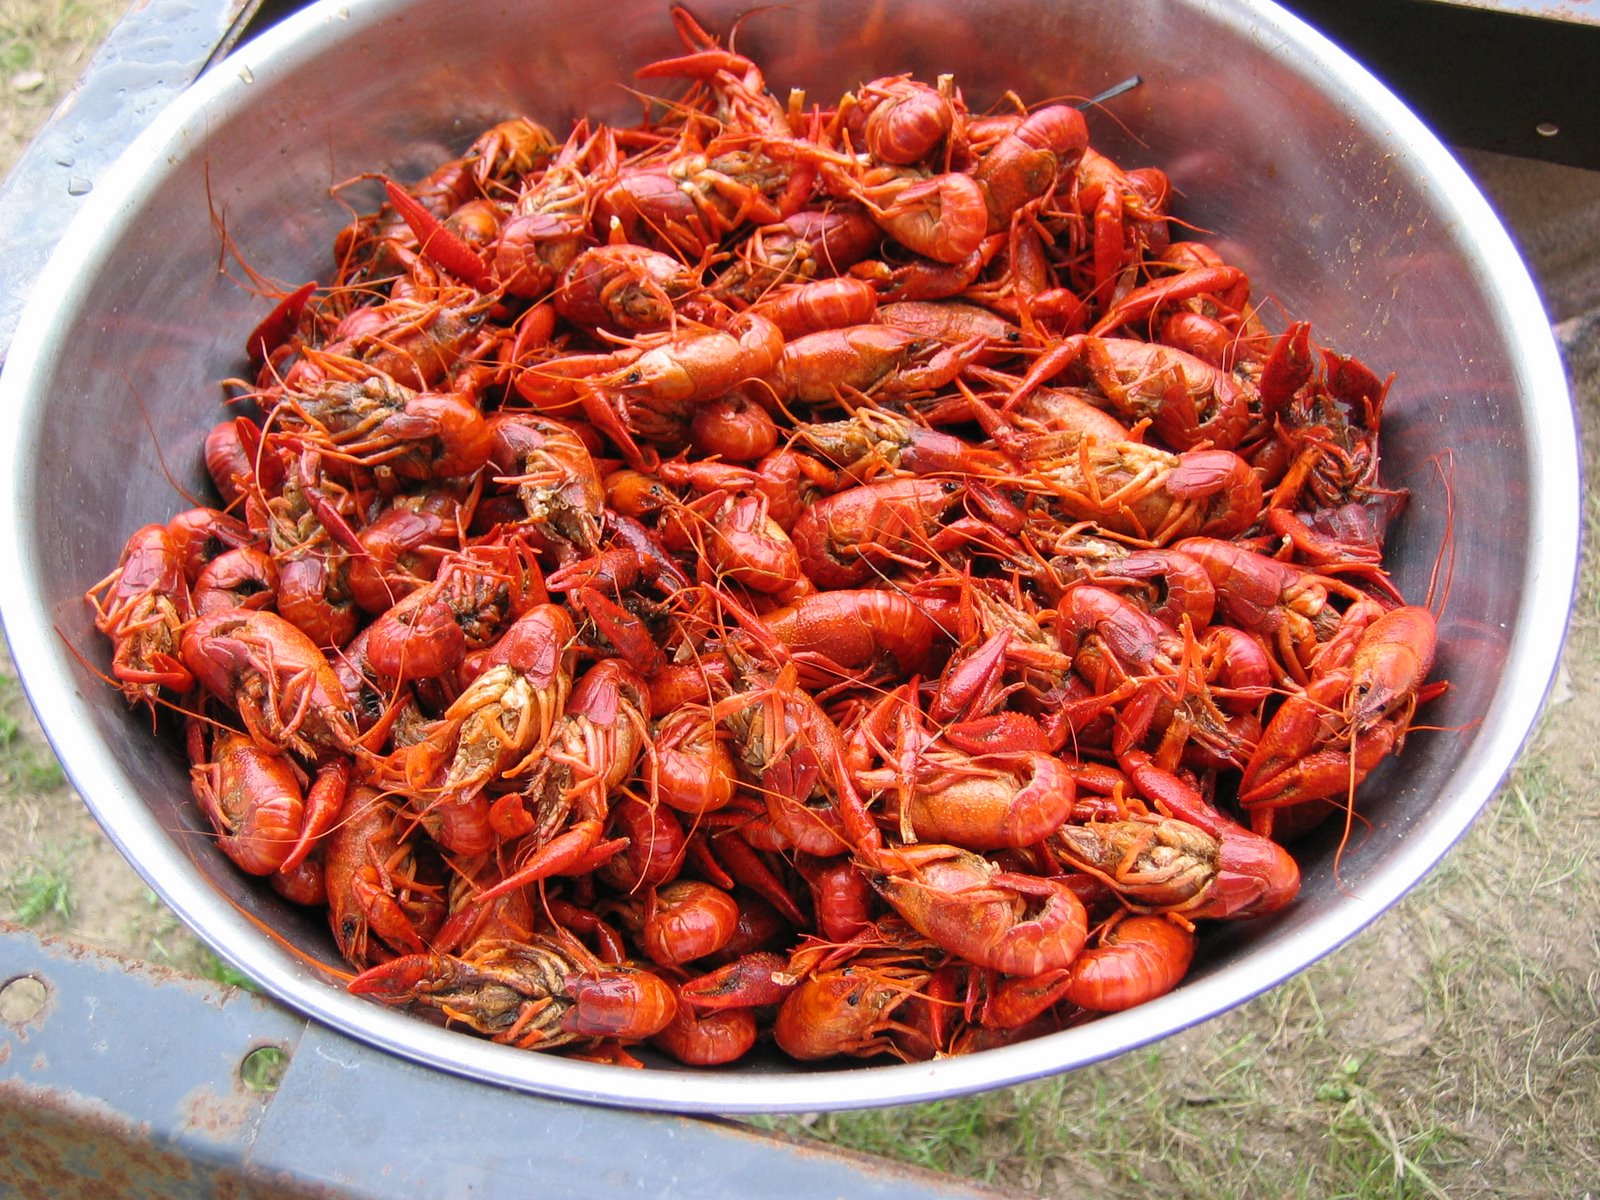 Are You Searching for Crawfish in Lafayette, LA?